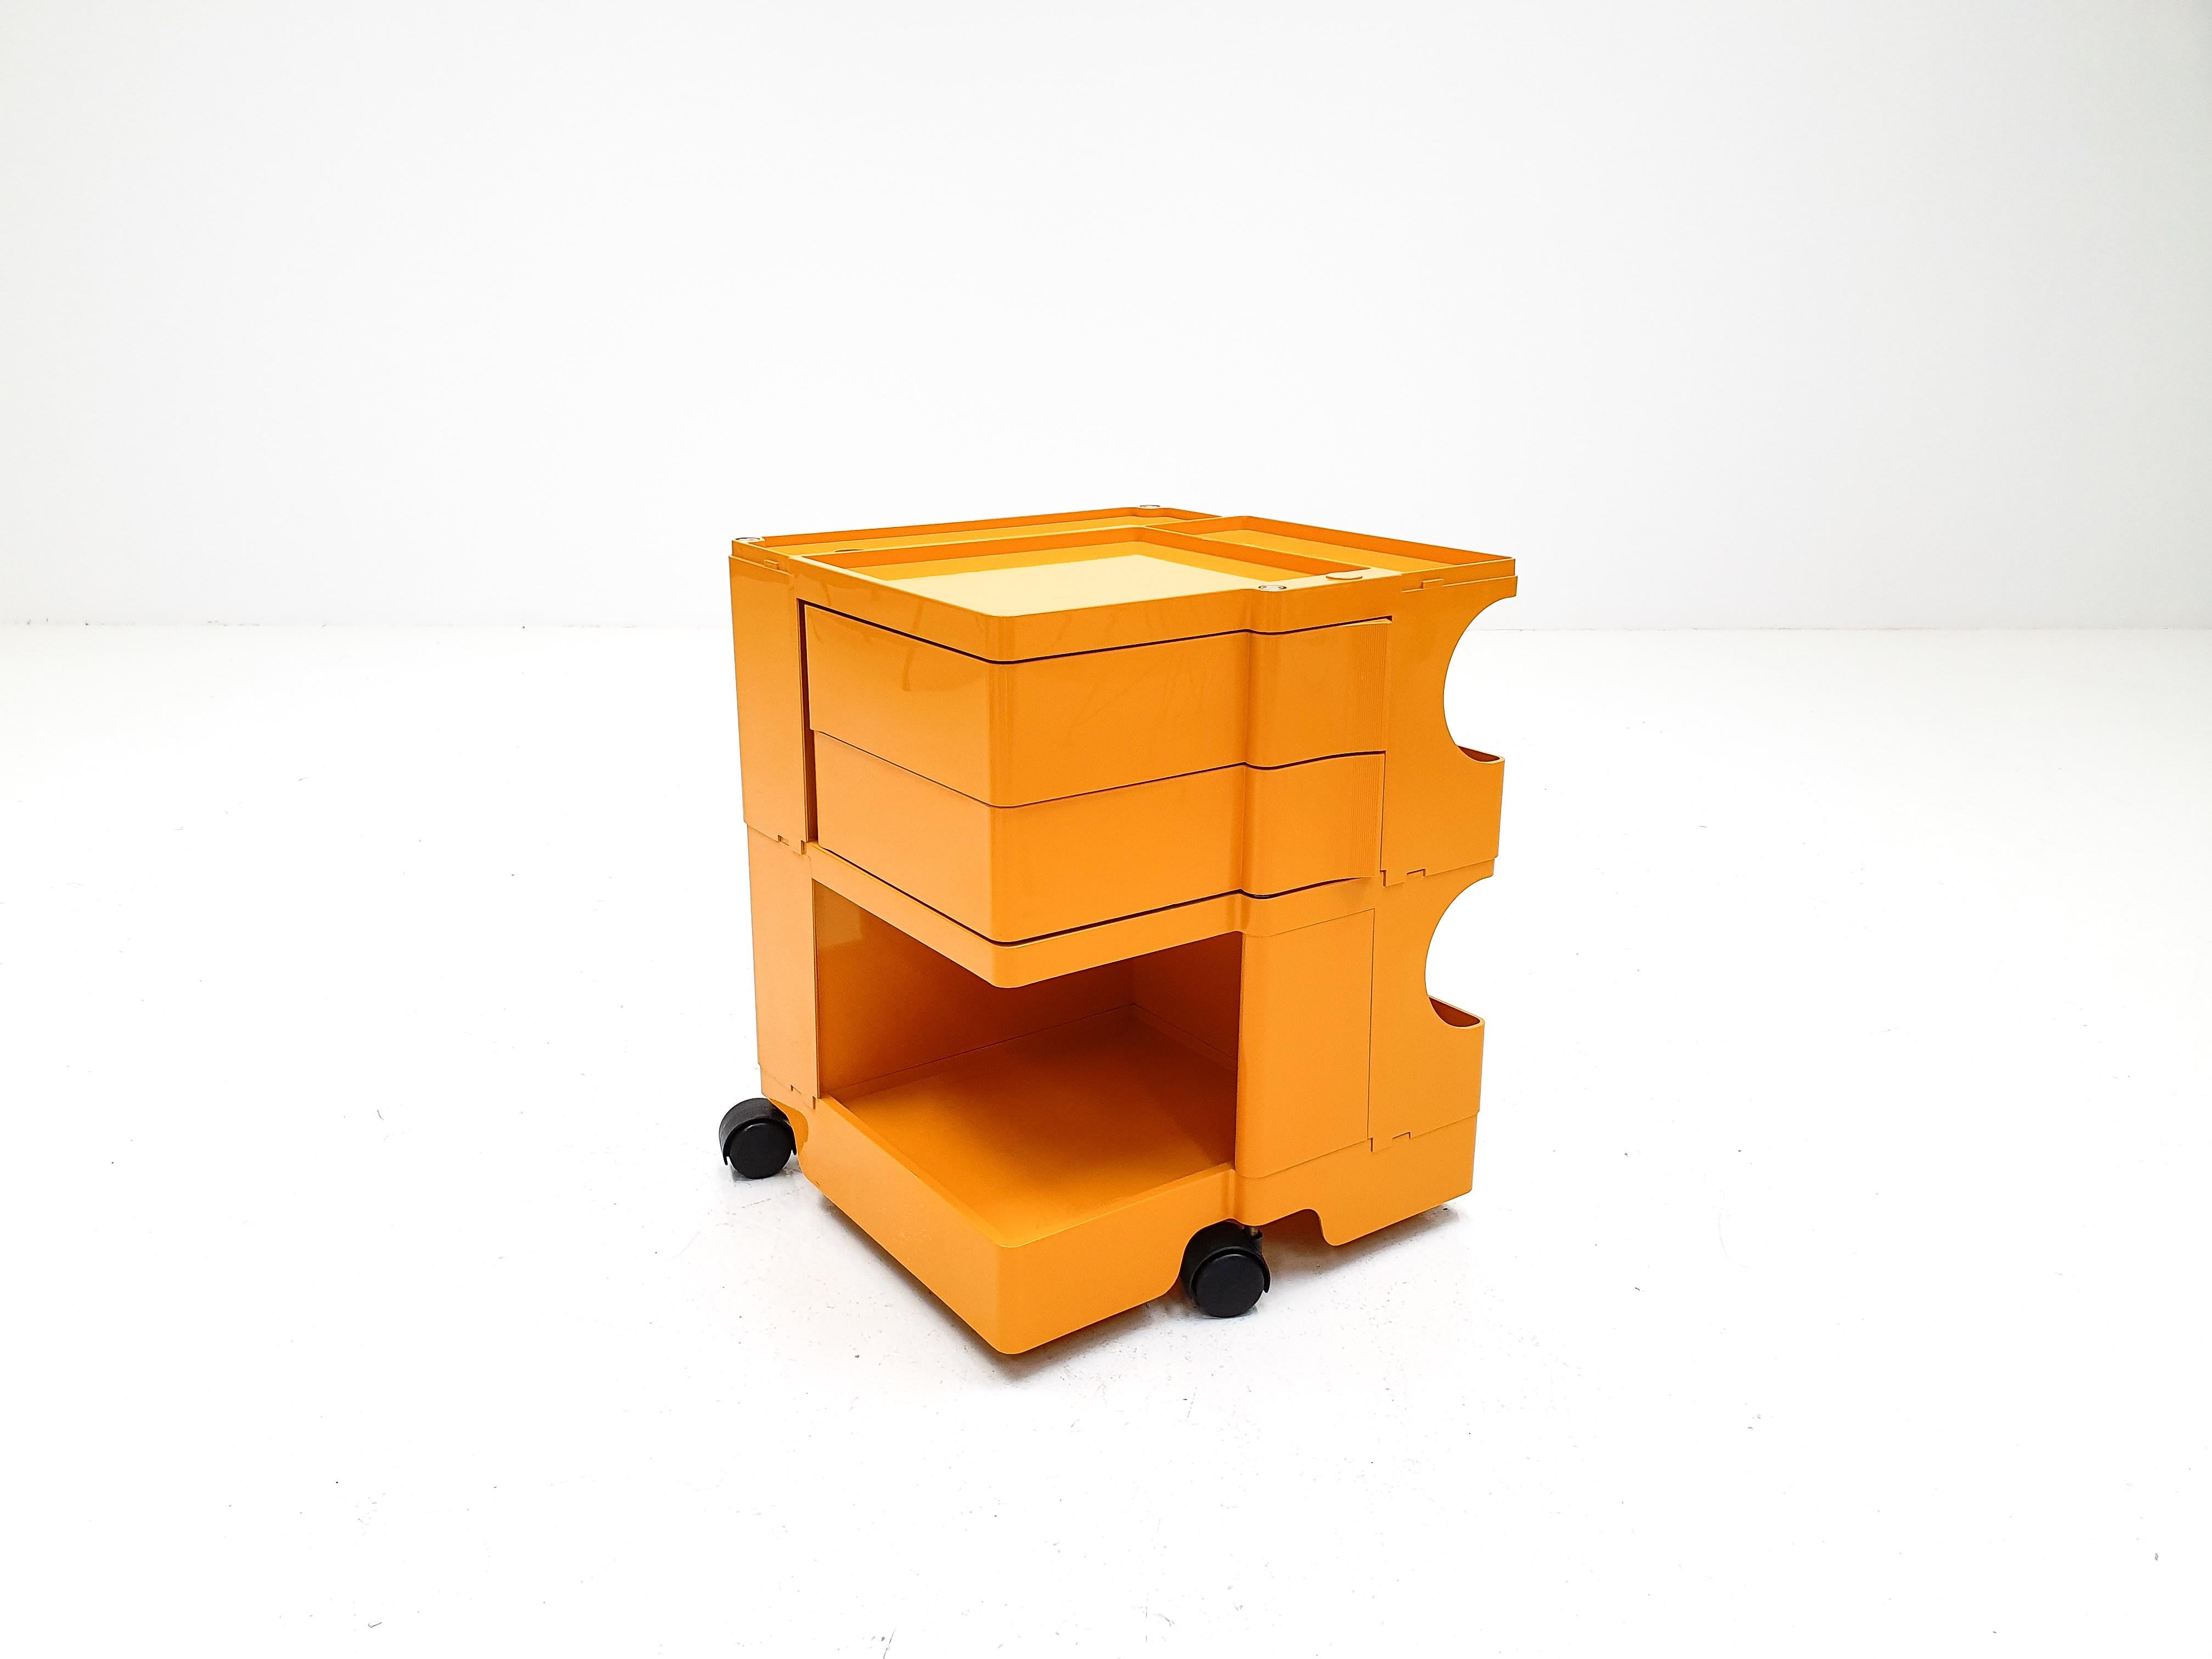 A vintage Italian 'Boby' trolley storage unit by Joe Colombo for Bieffeplast
 
The Boby portable storage unit was designed by Joe Colombo and launched in 1970. Amongst many awards it received its first was at SMAU in 1971, it is part of the